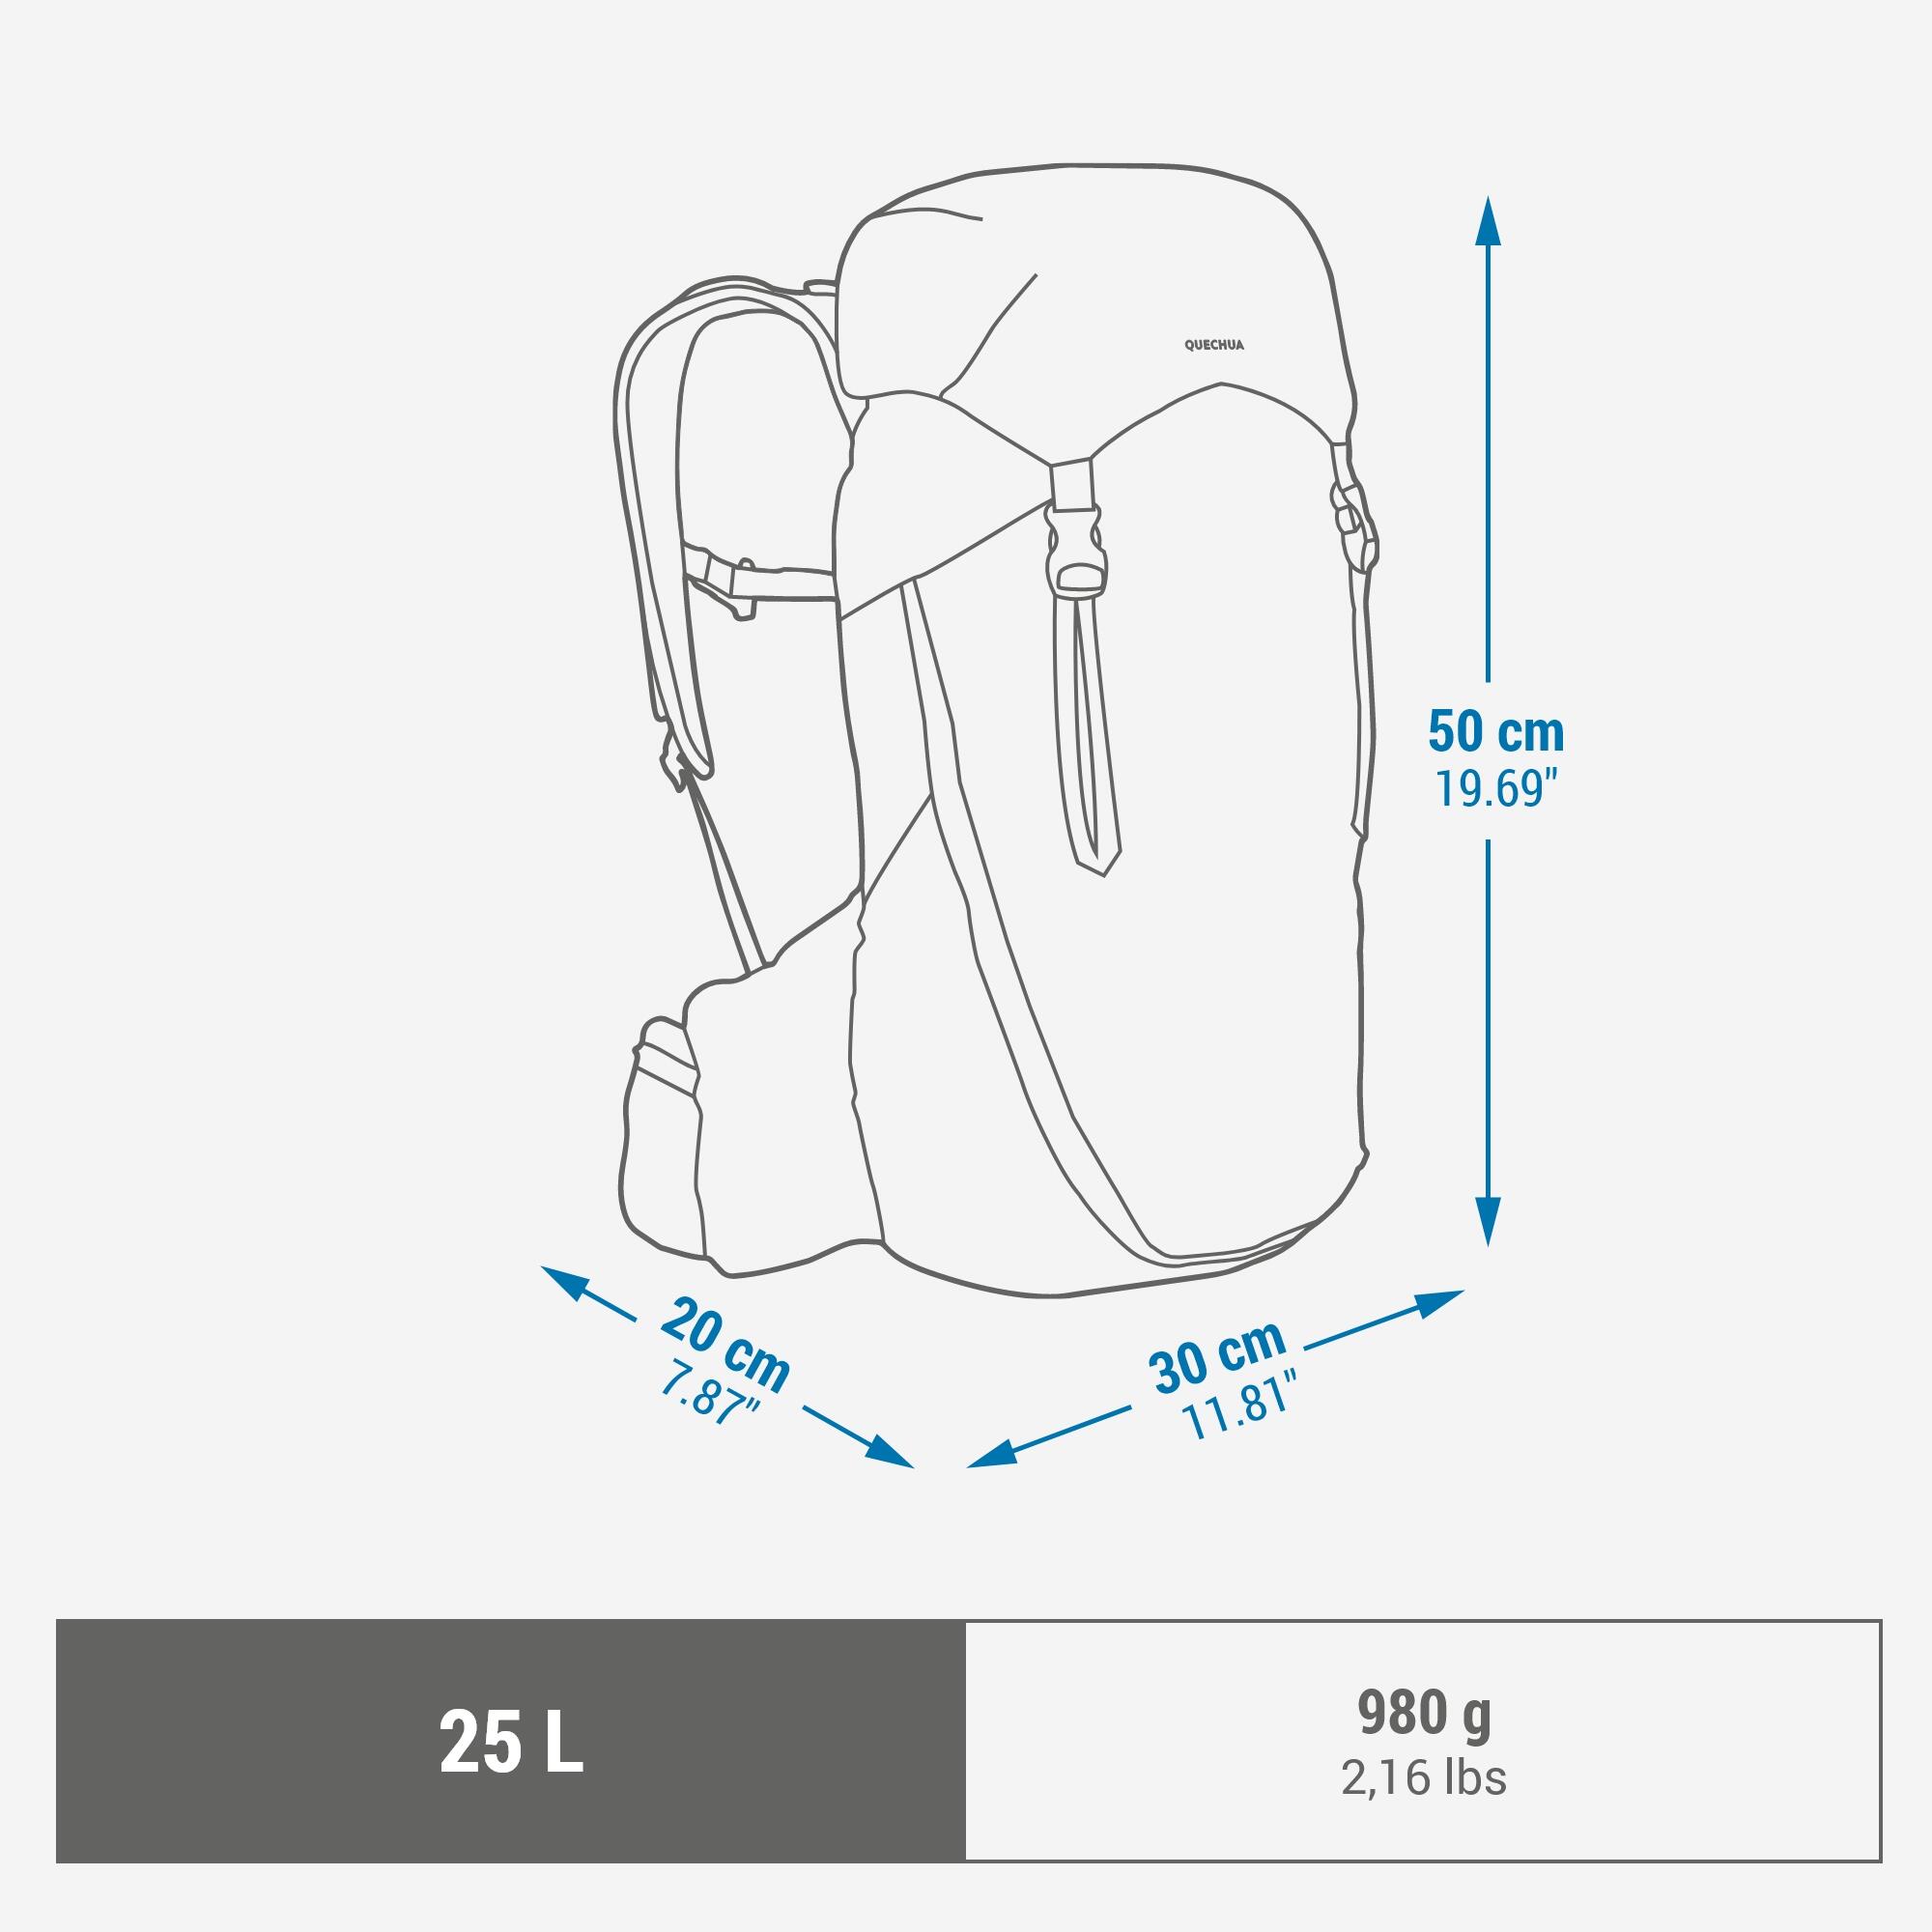 Mountain hiking backpack 25L - MH900 3/18